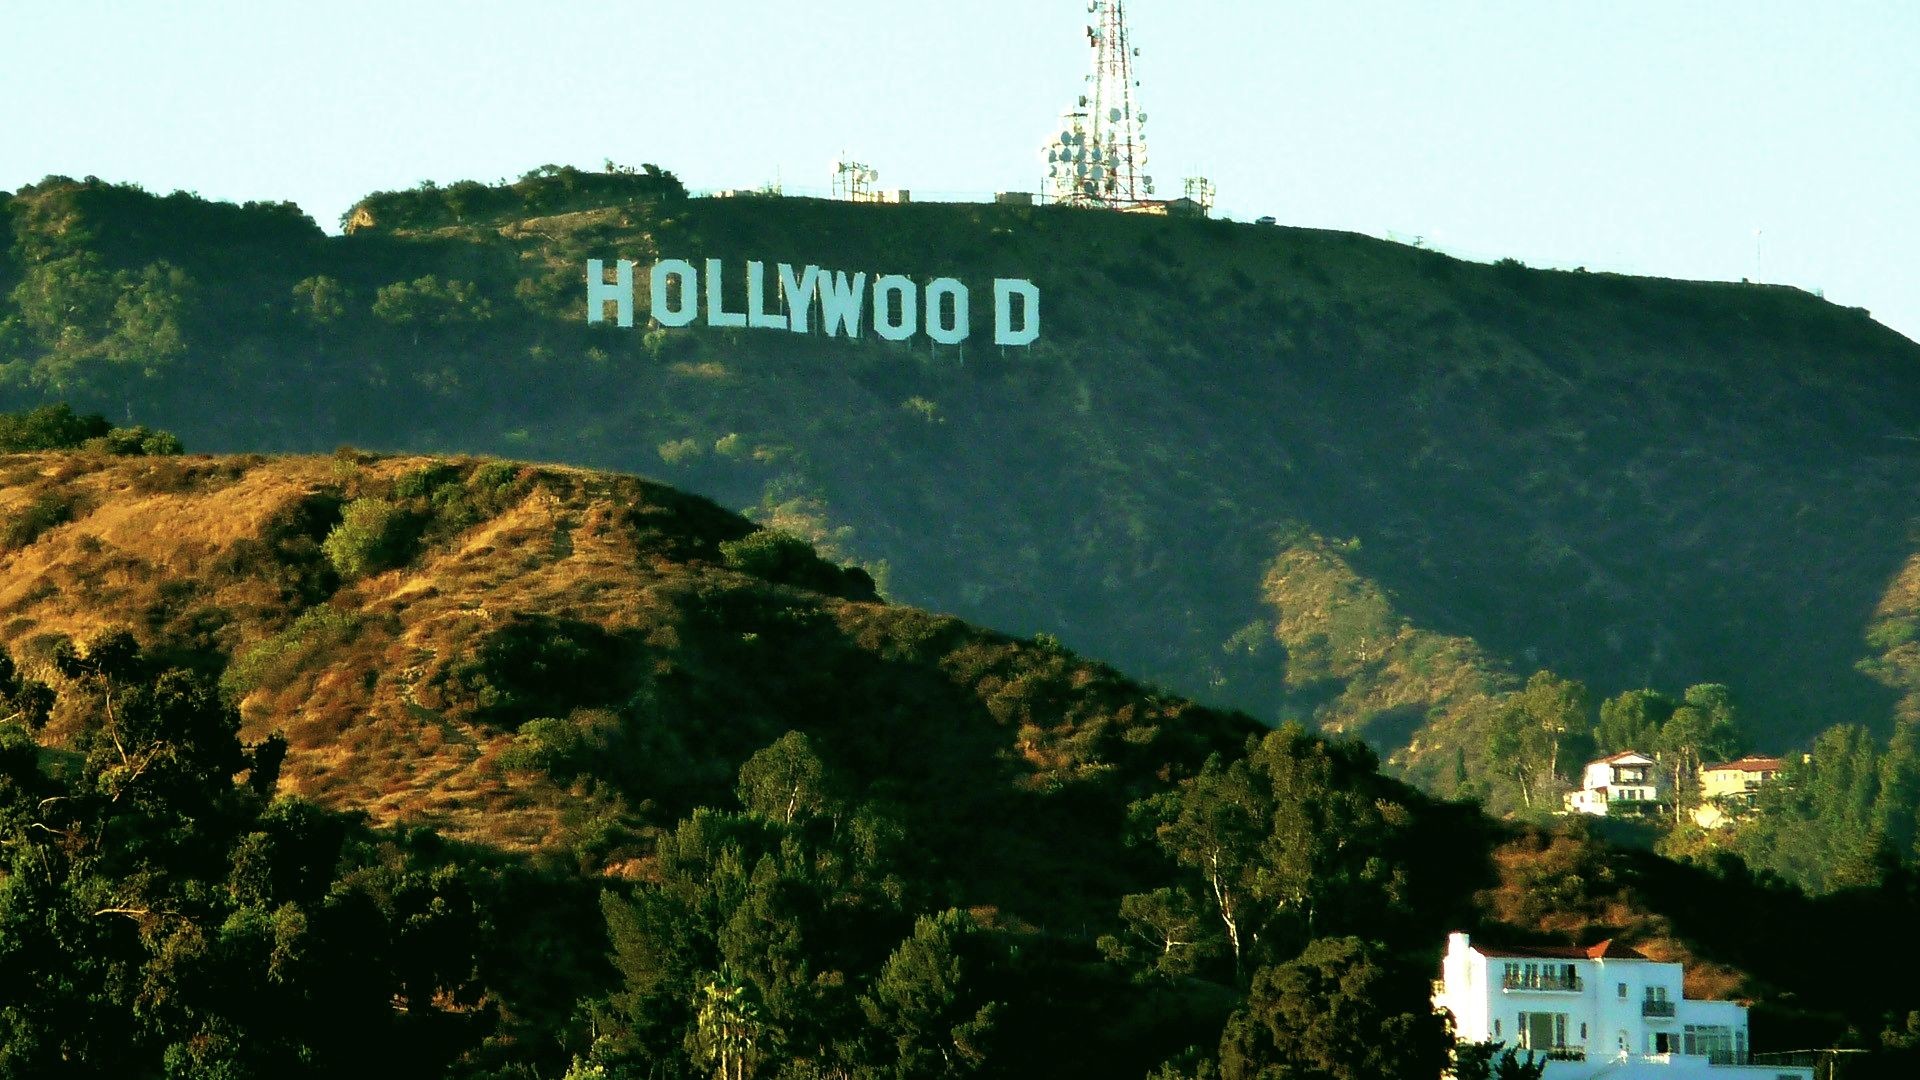 1920x1080 Hollywood Tagged Wallpapers Travel Tips Tourism Famous Attractions  Sightseeing Los Angeles. house prints. fresh ...